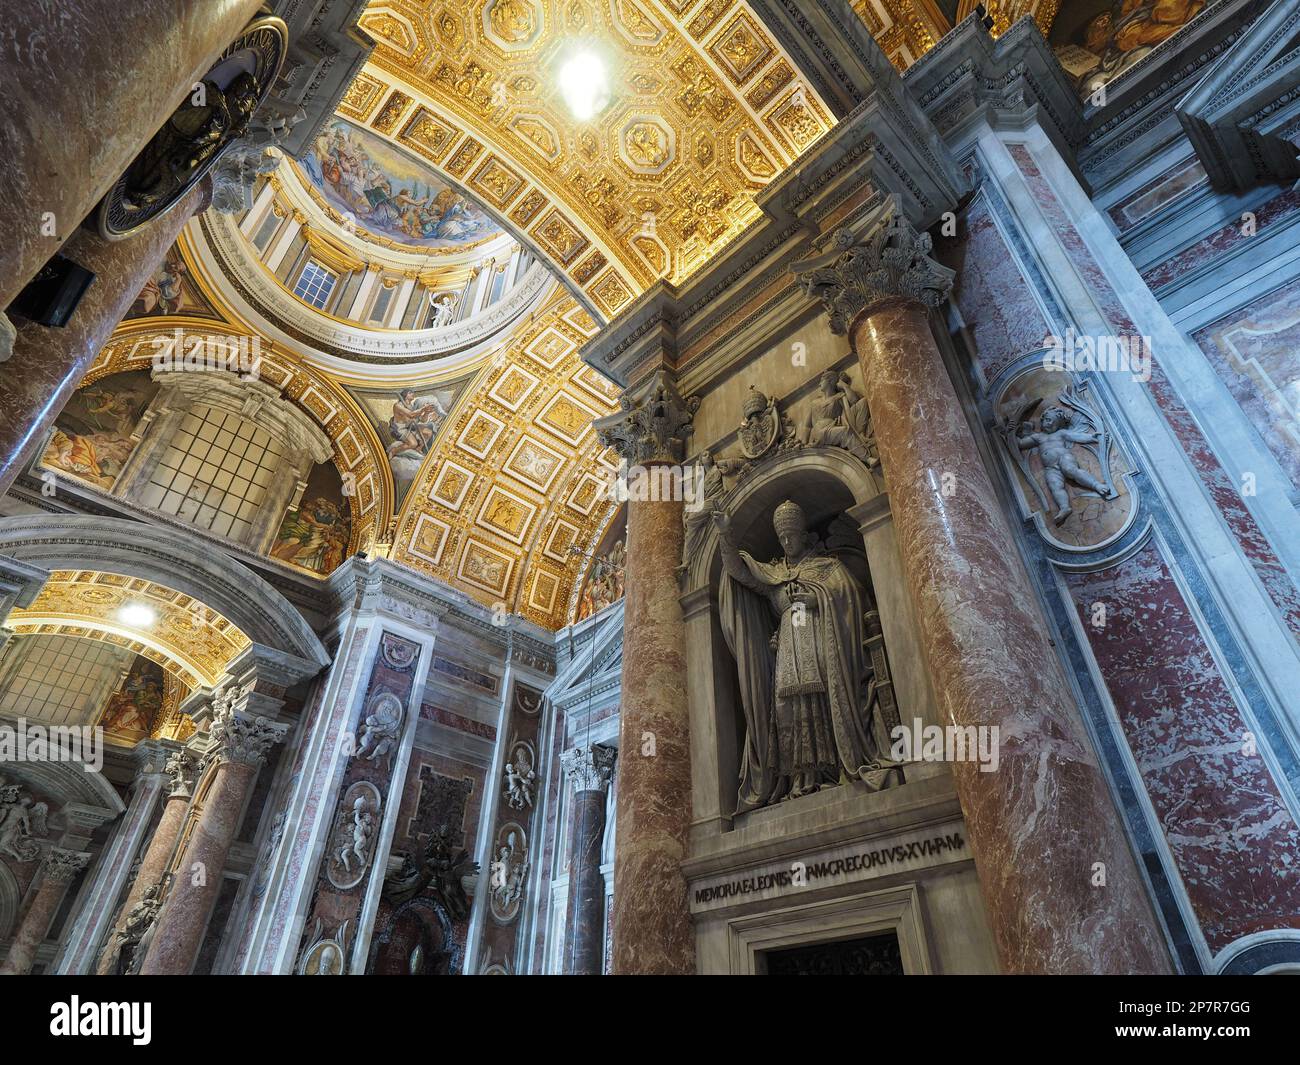 The interior decoration in Saint Peters Basilica, together with the sheer size, is mindblowing. Vatican City, Europe Stock Photo